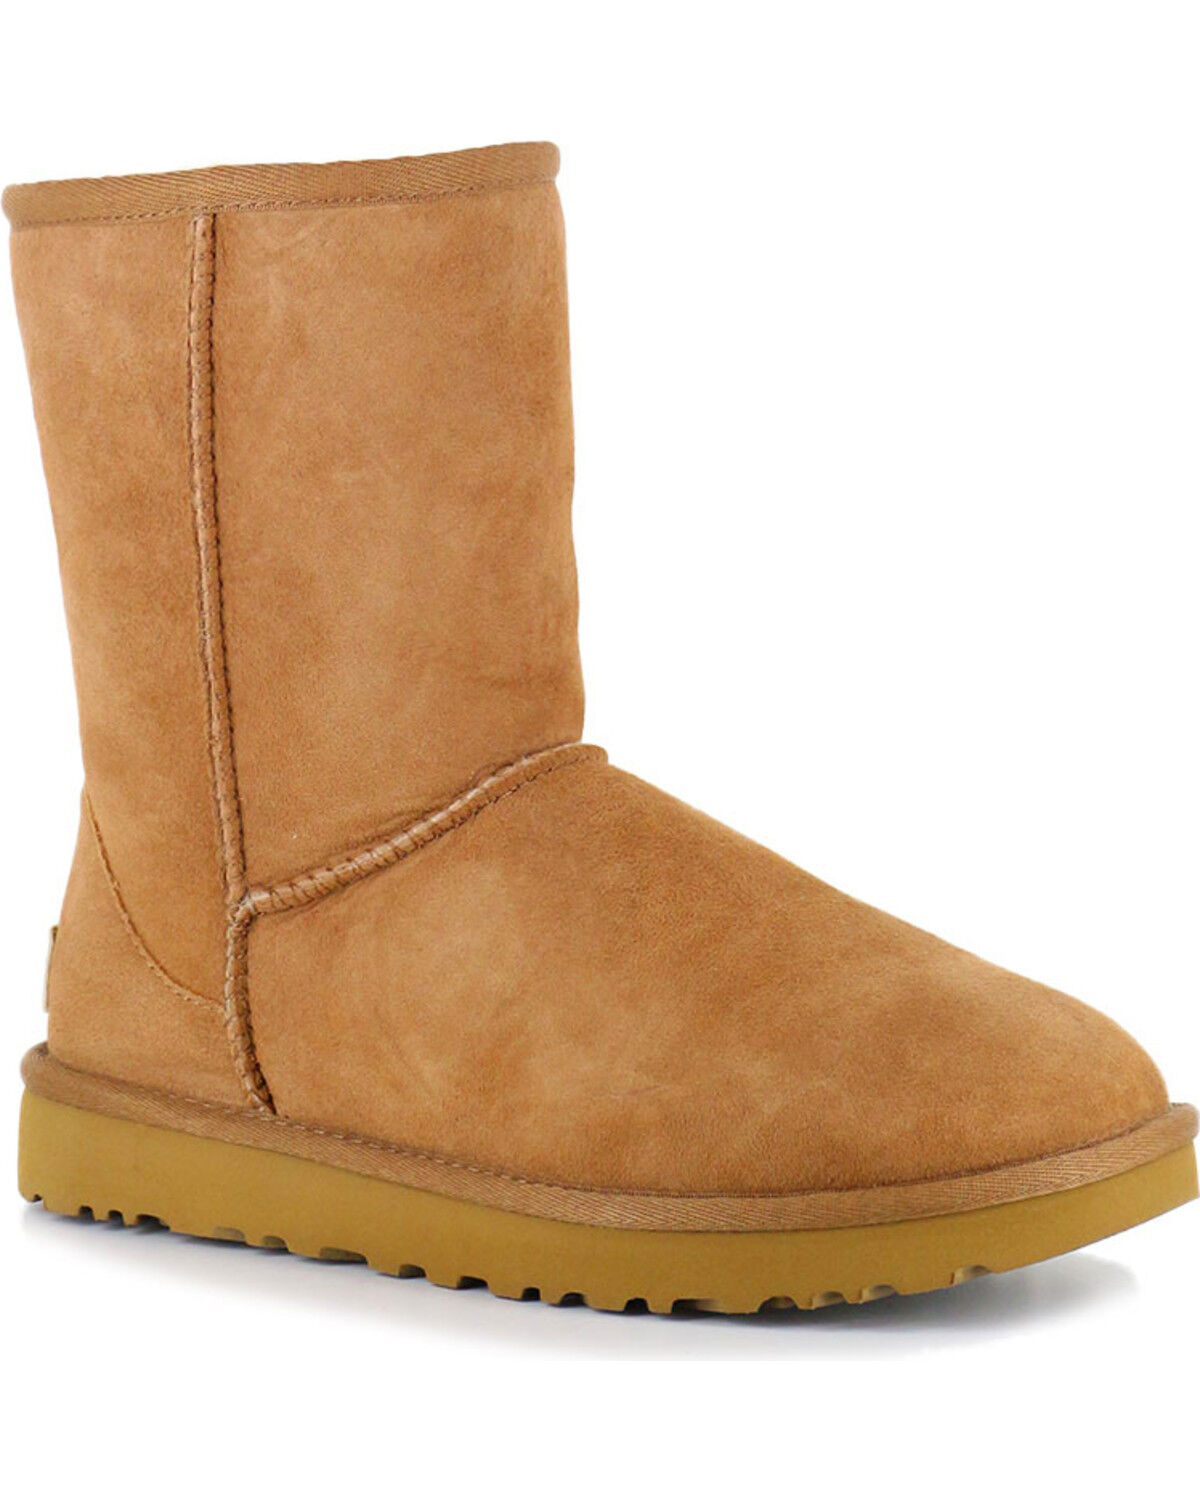 buy ugg boots near me